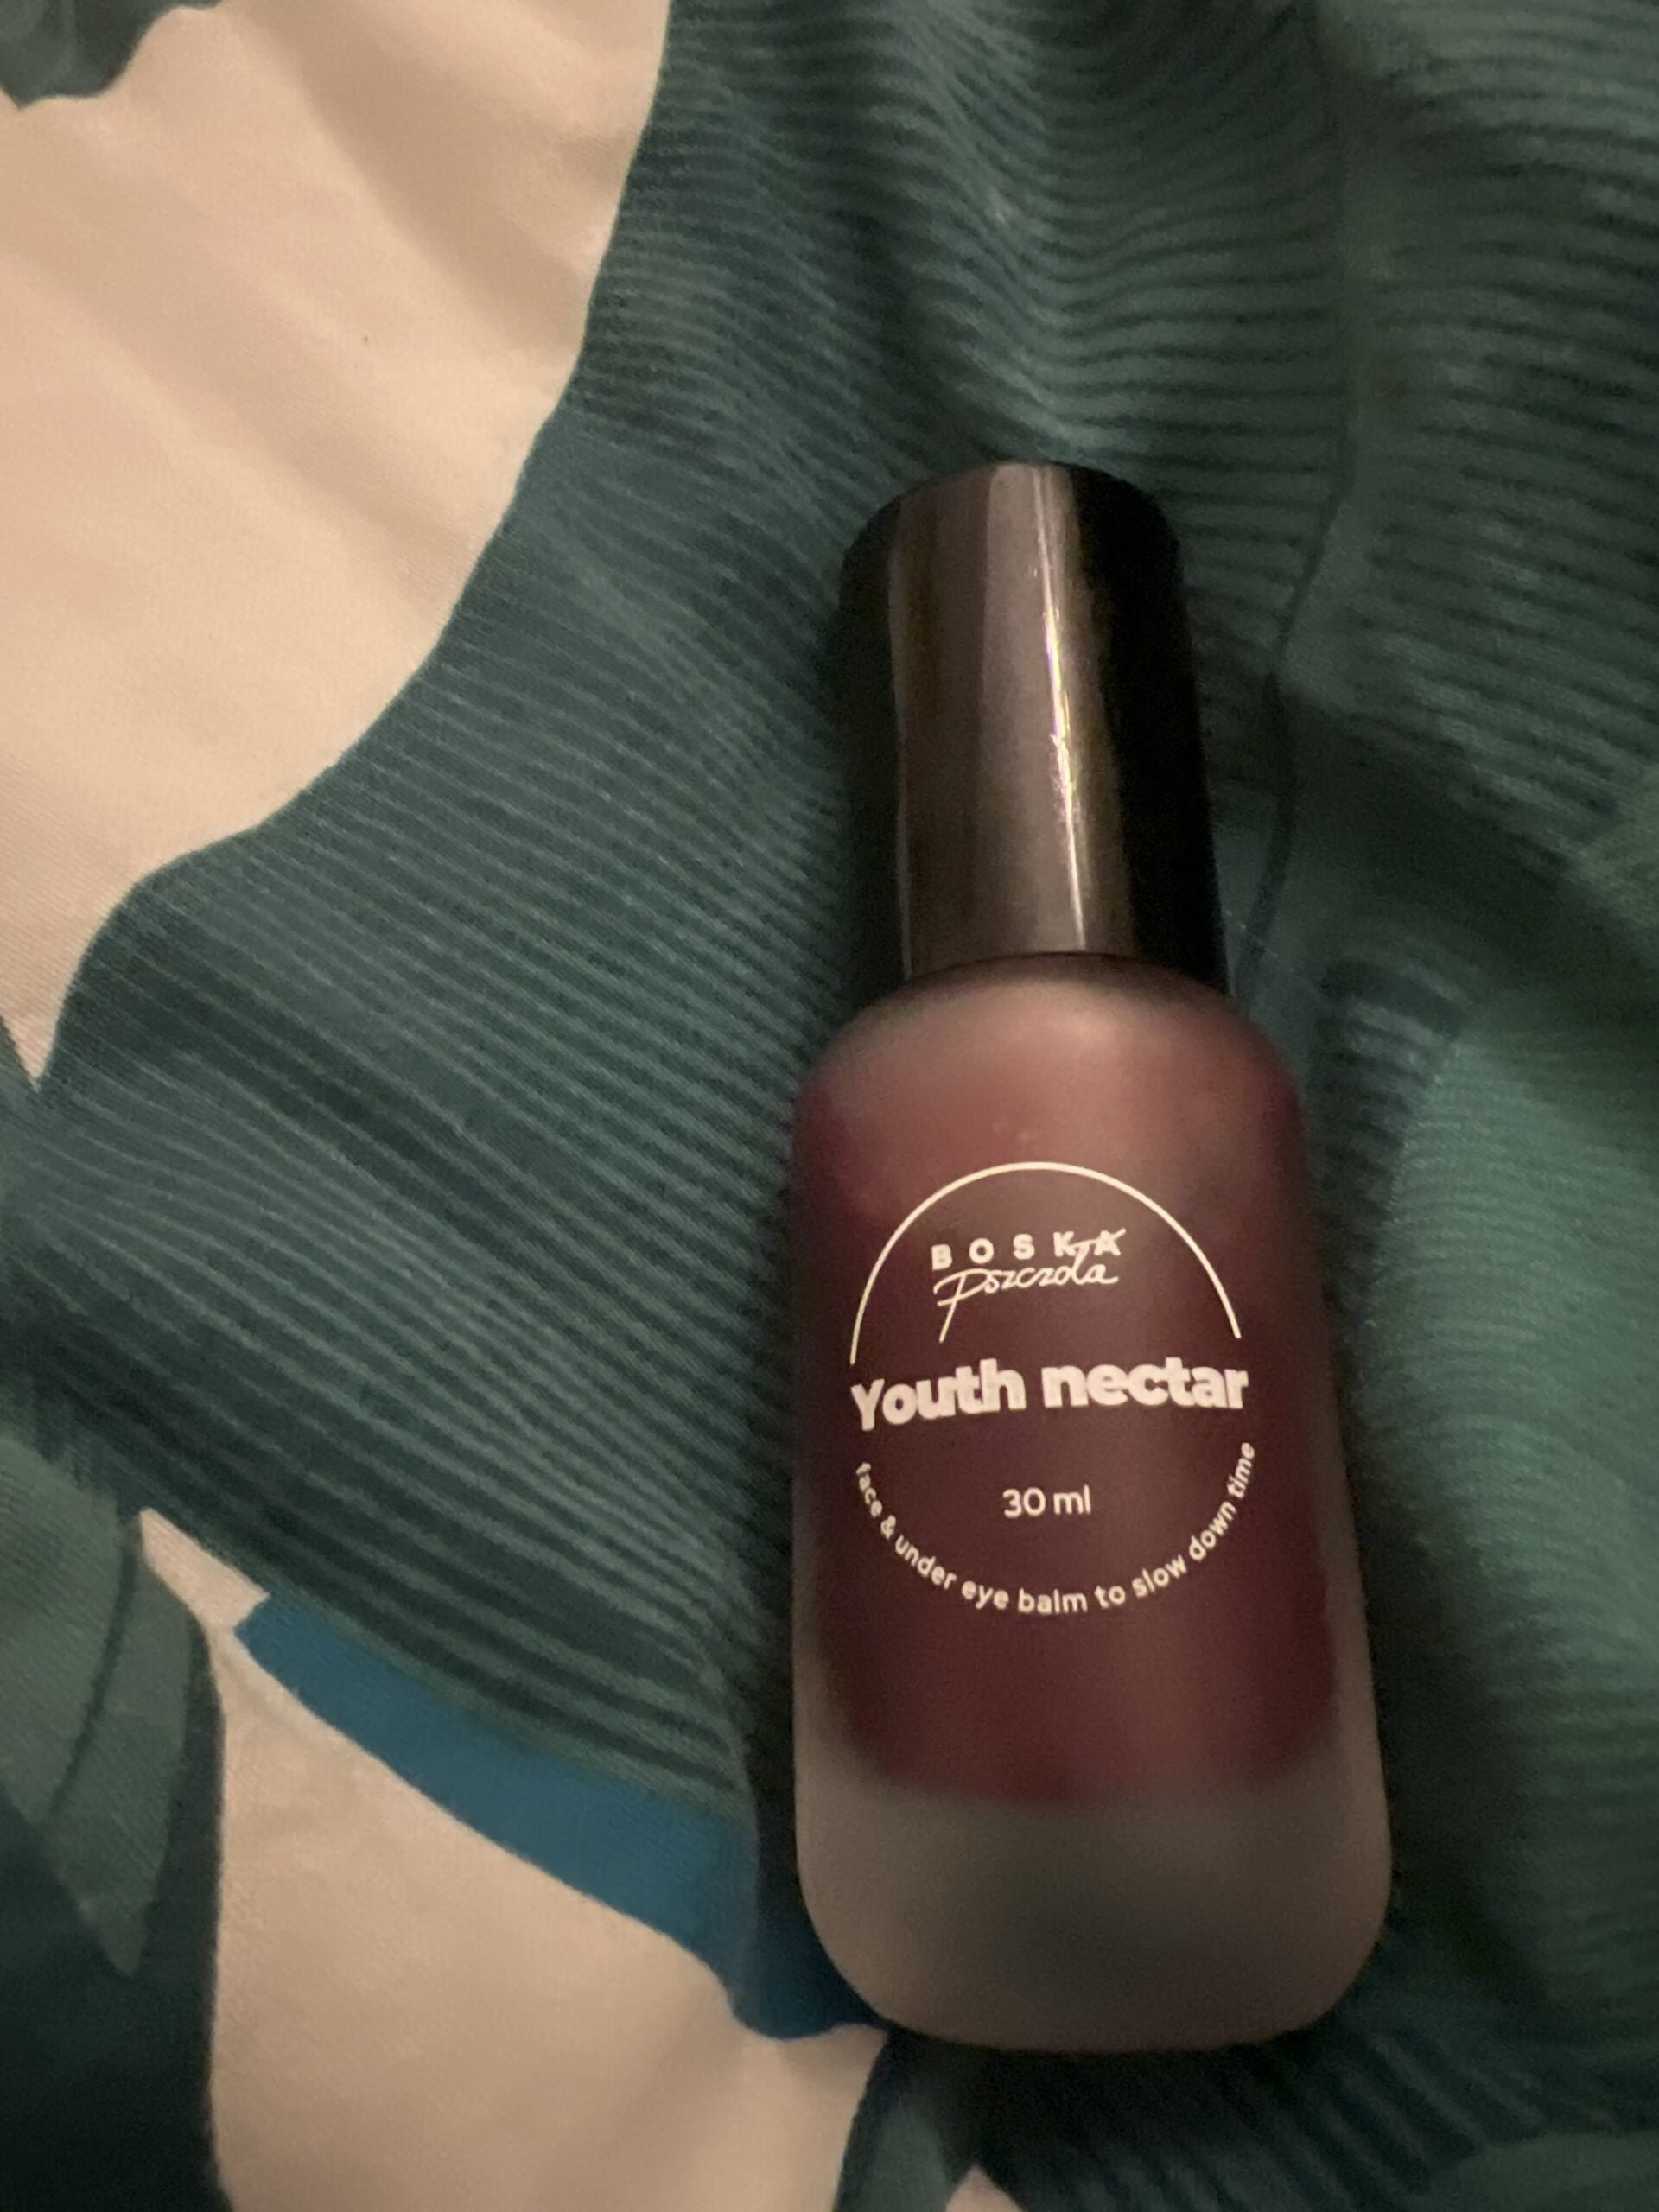 SAMPLE of Youth Nectar face and eye serum with 1% bacchio - 2 gr photo review